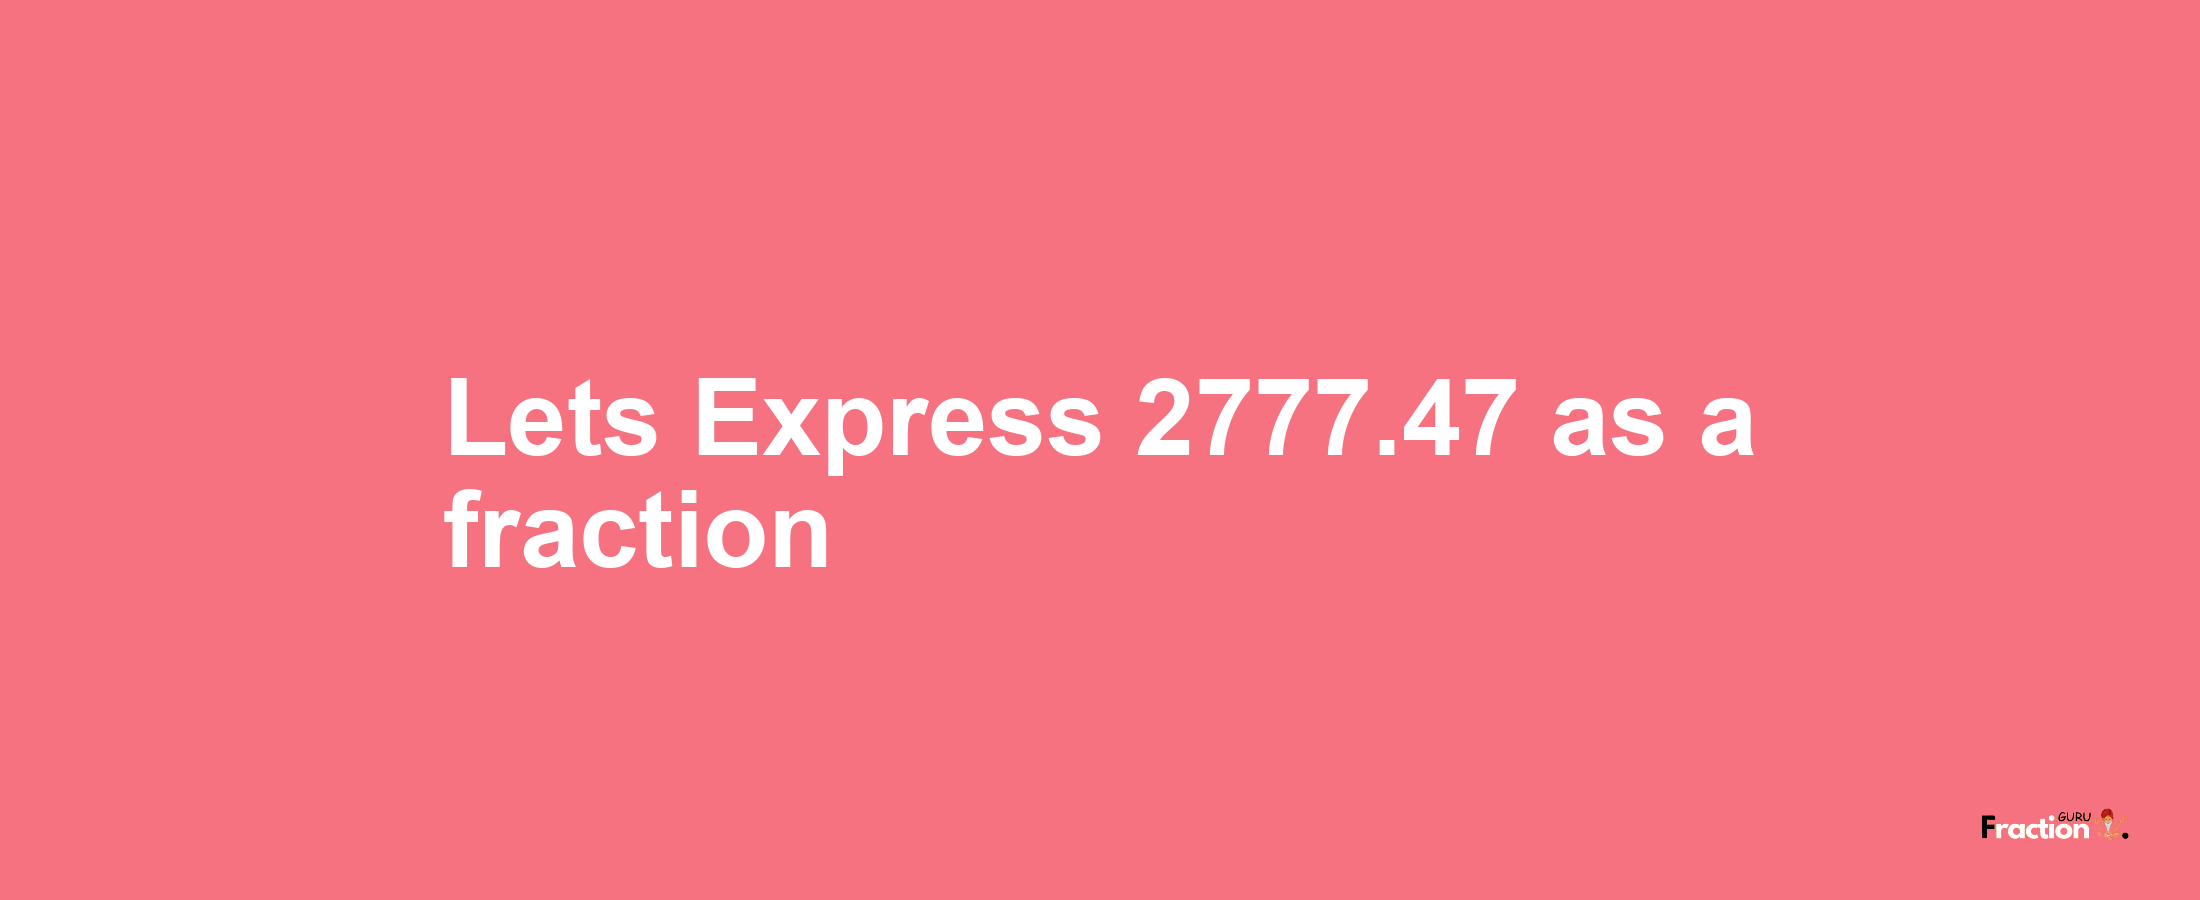 Lets Express 2777.47 as afraction